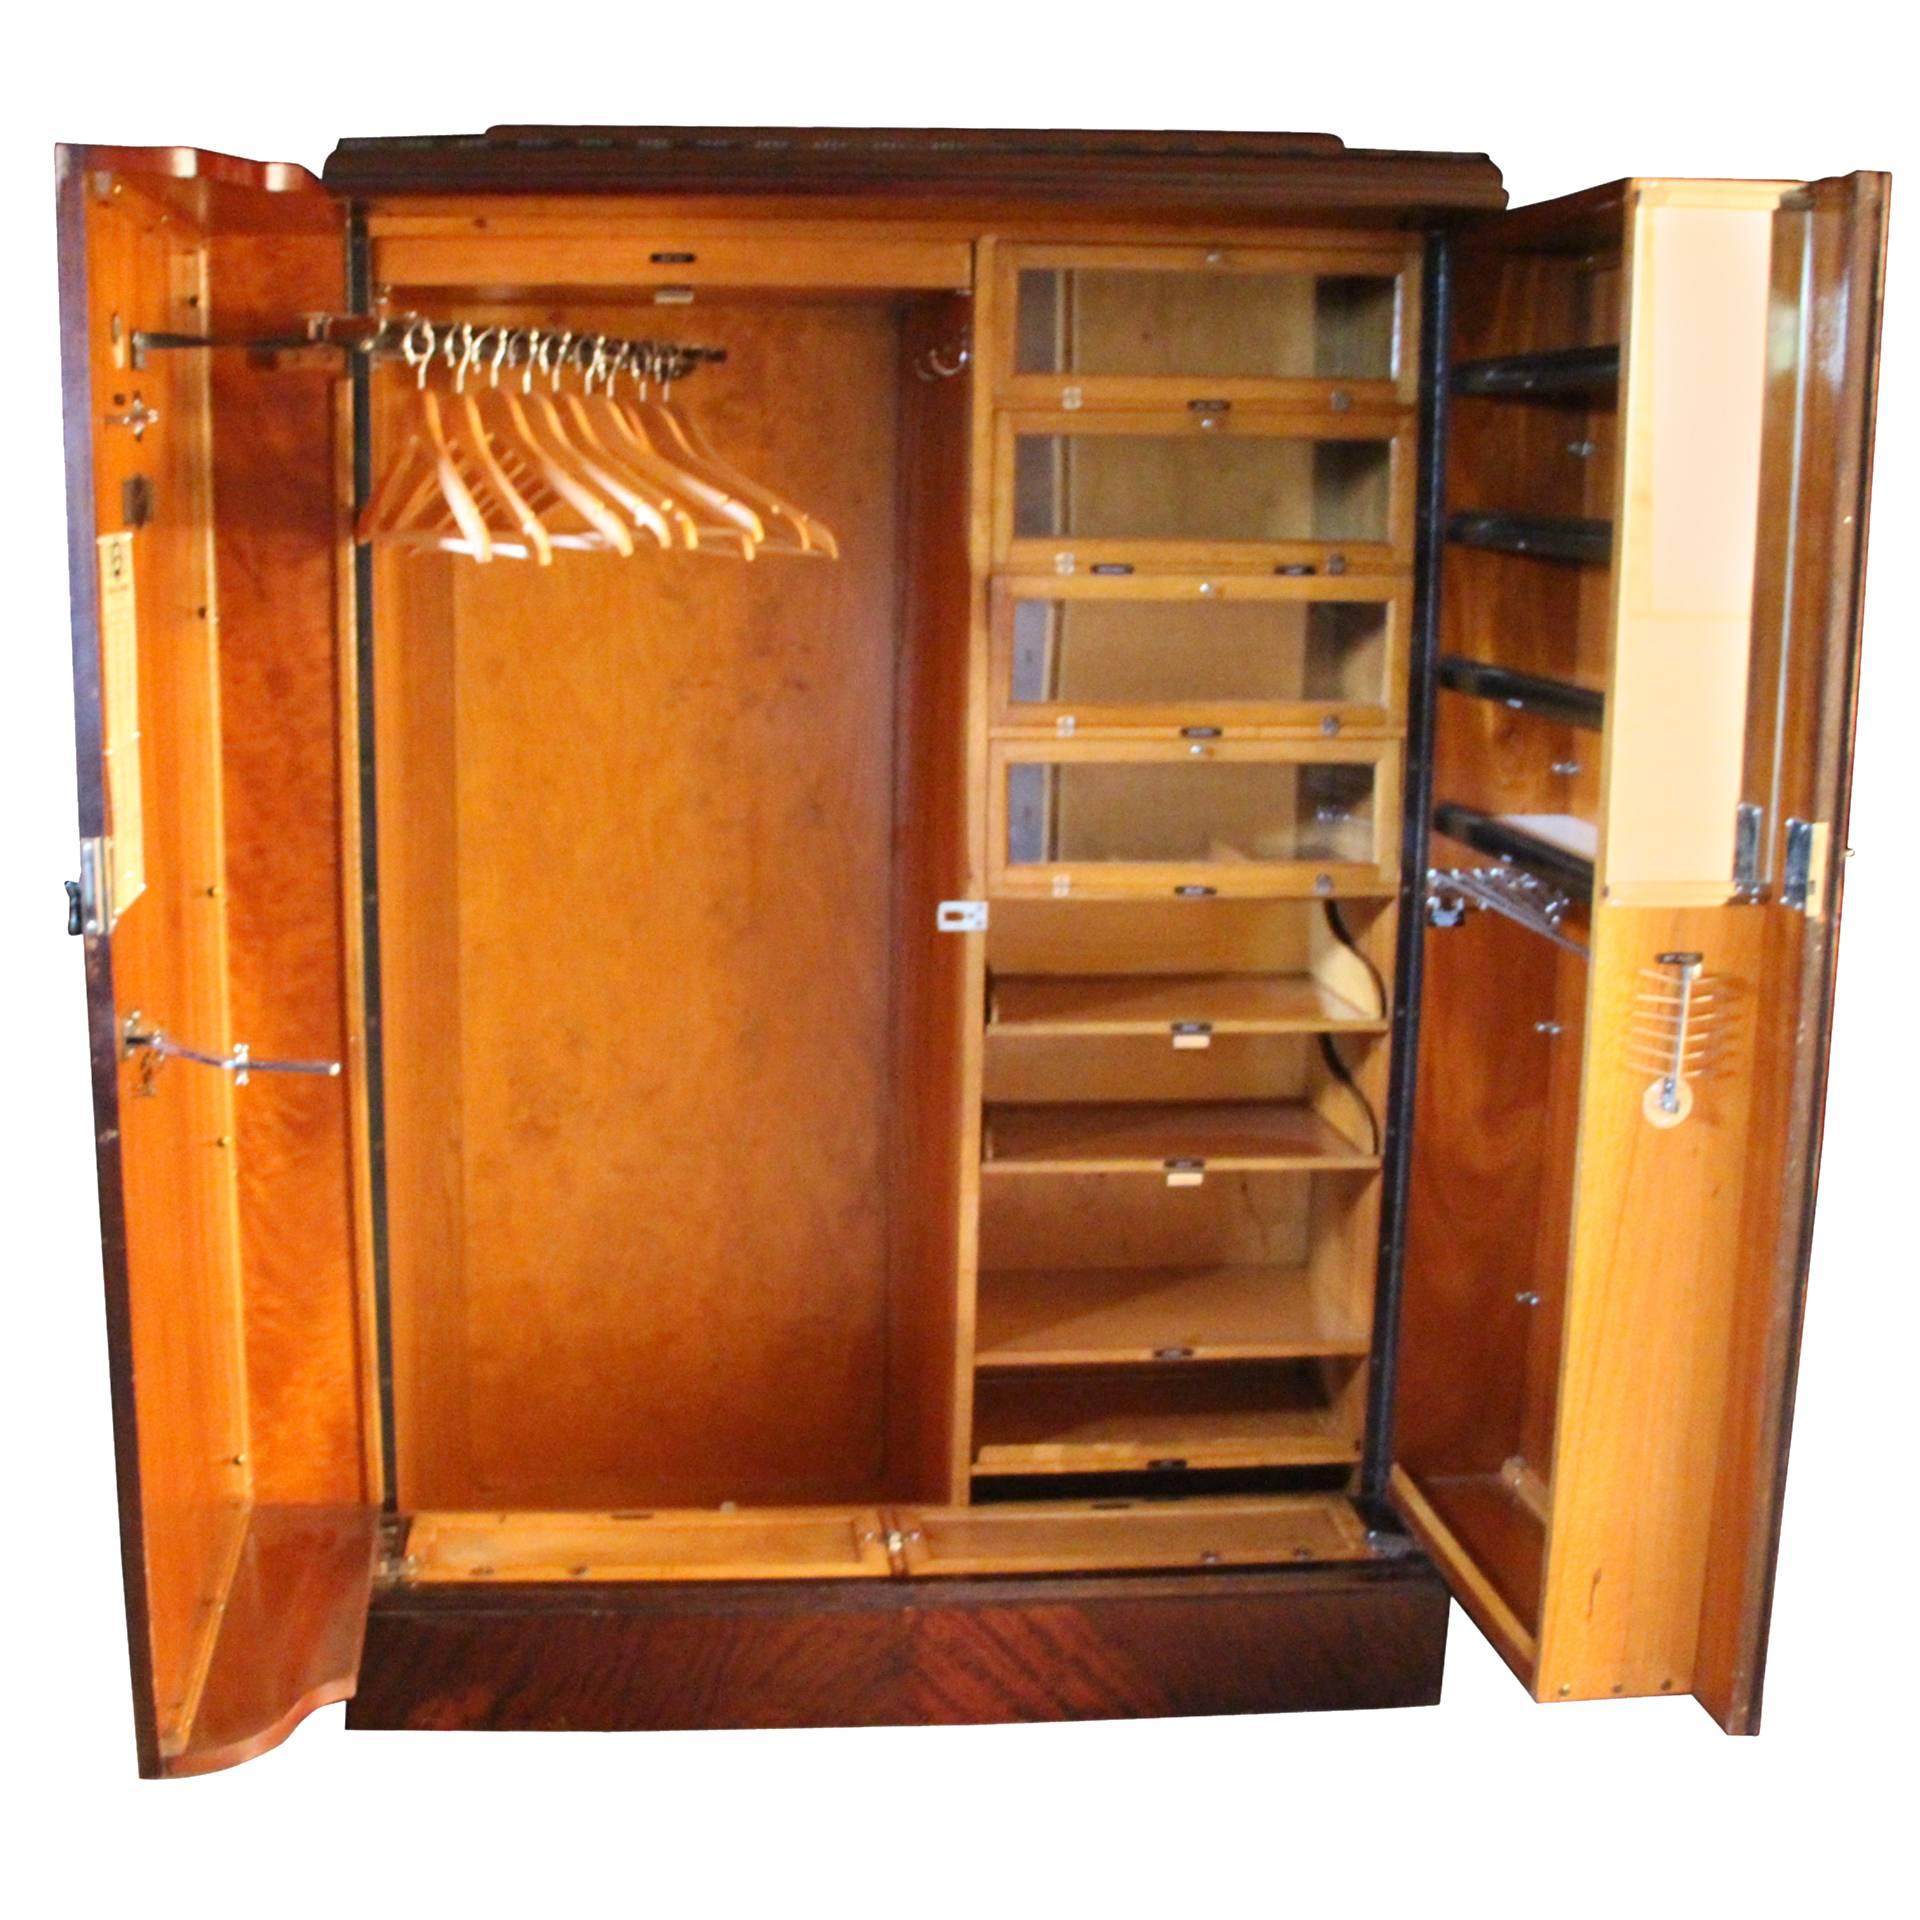 1930s Mahogany All Fitted Closet, Compactom Steamer Trunk